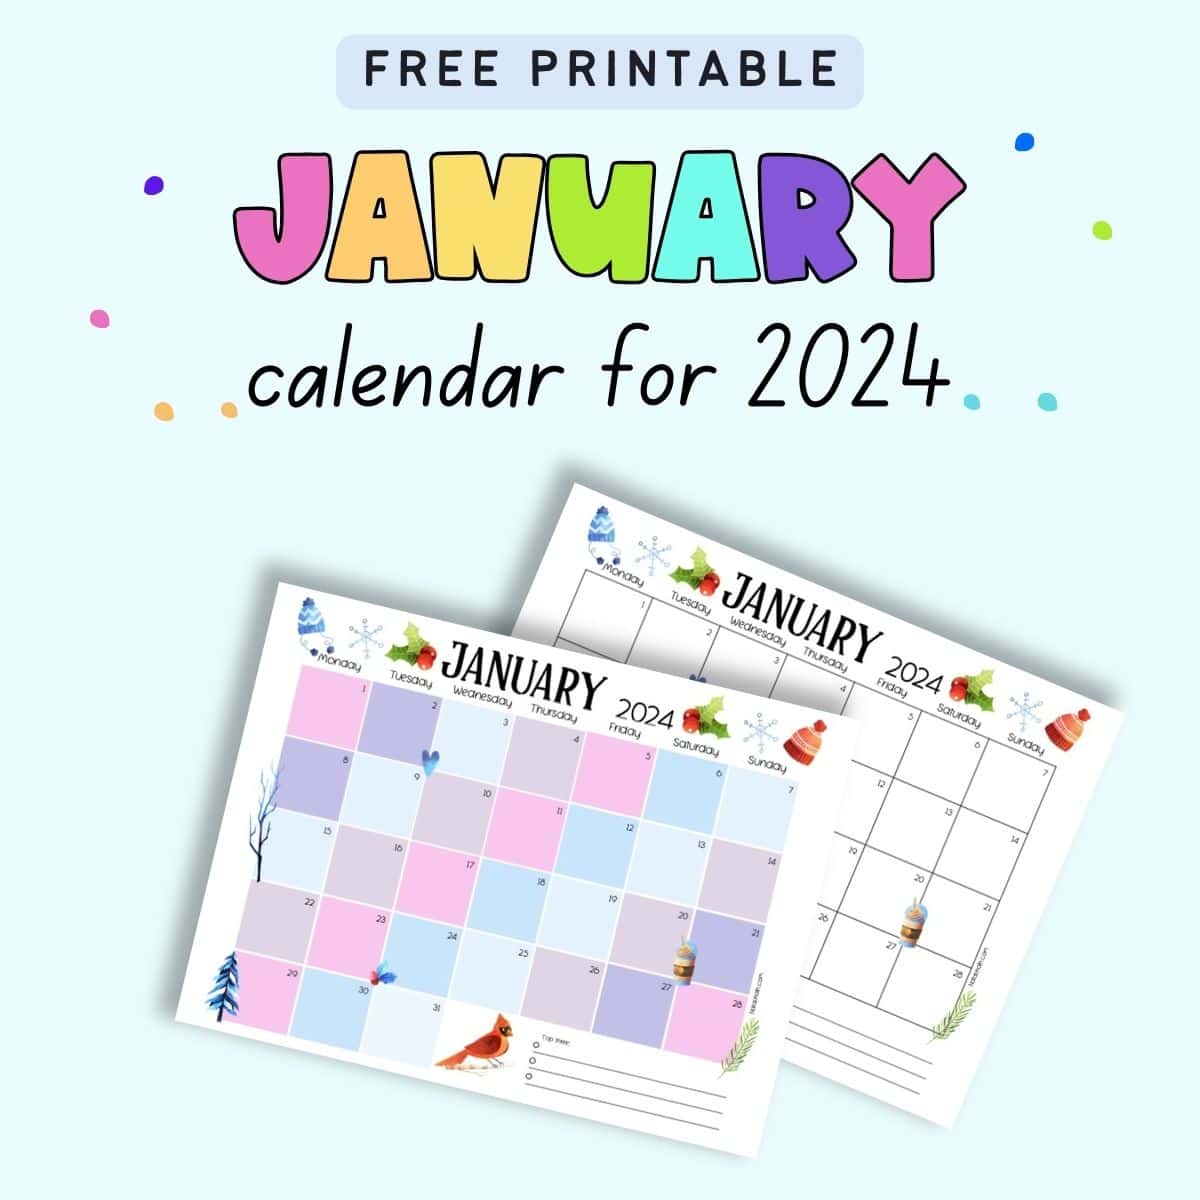 Text "free printable January calendar for 2024" with a preview of two dated January calendars for 2024